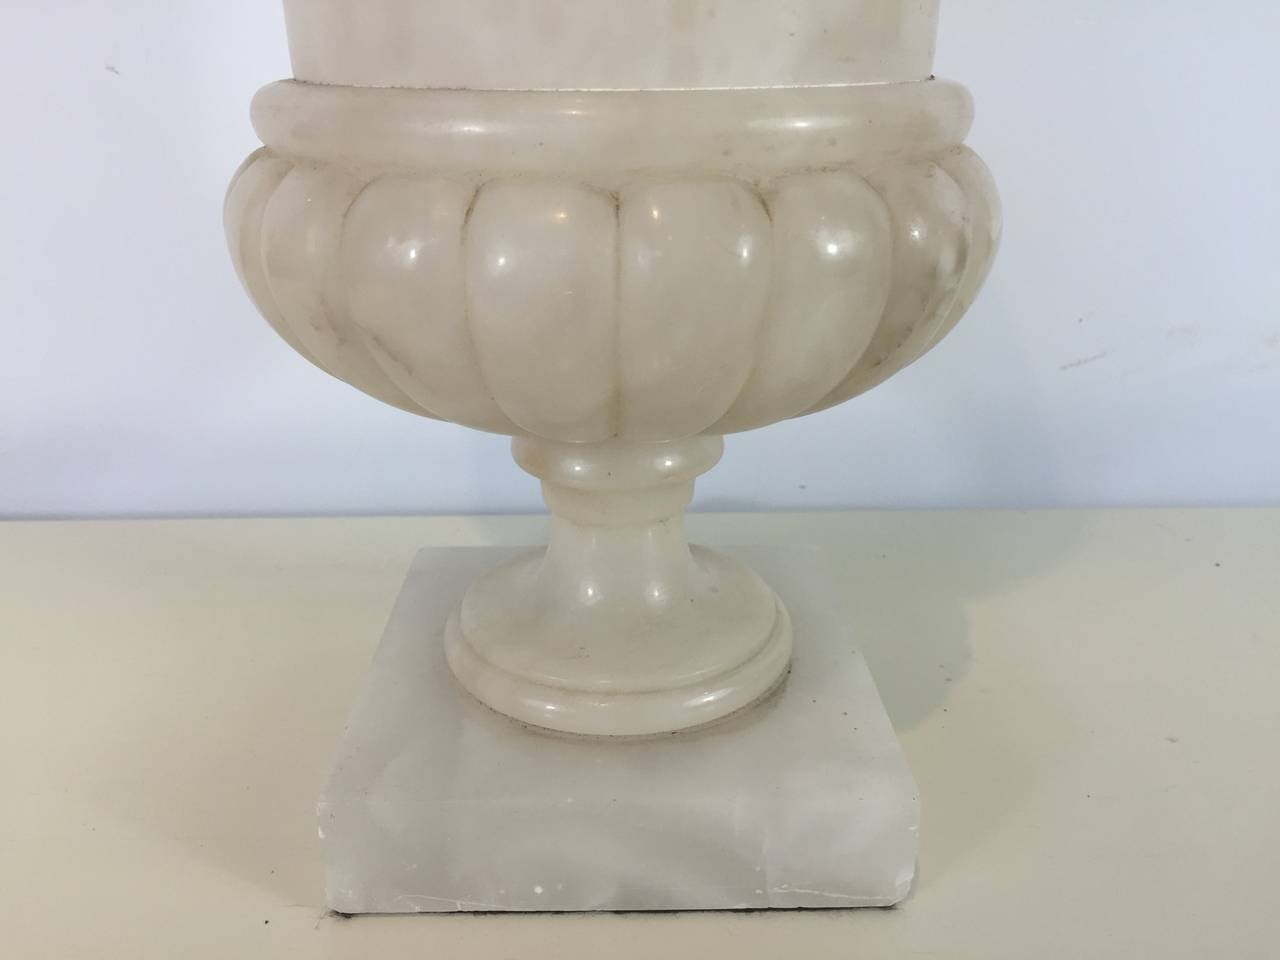 Art Deco carved marble campana urn Lamp, illuminated from within. Measures: 14.5